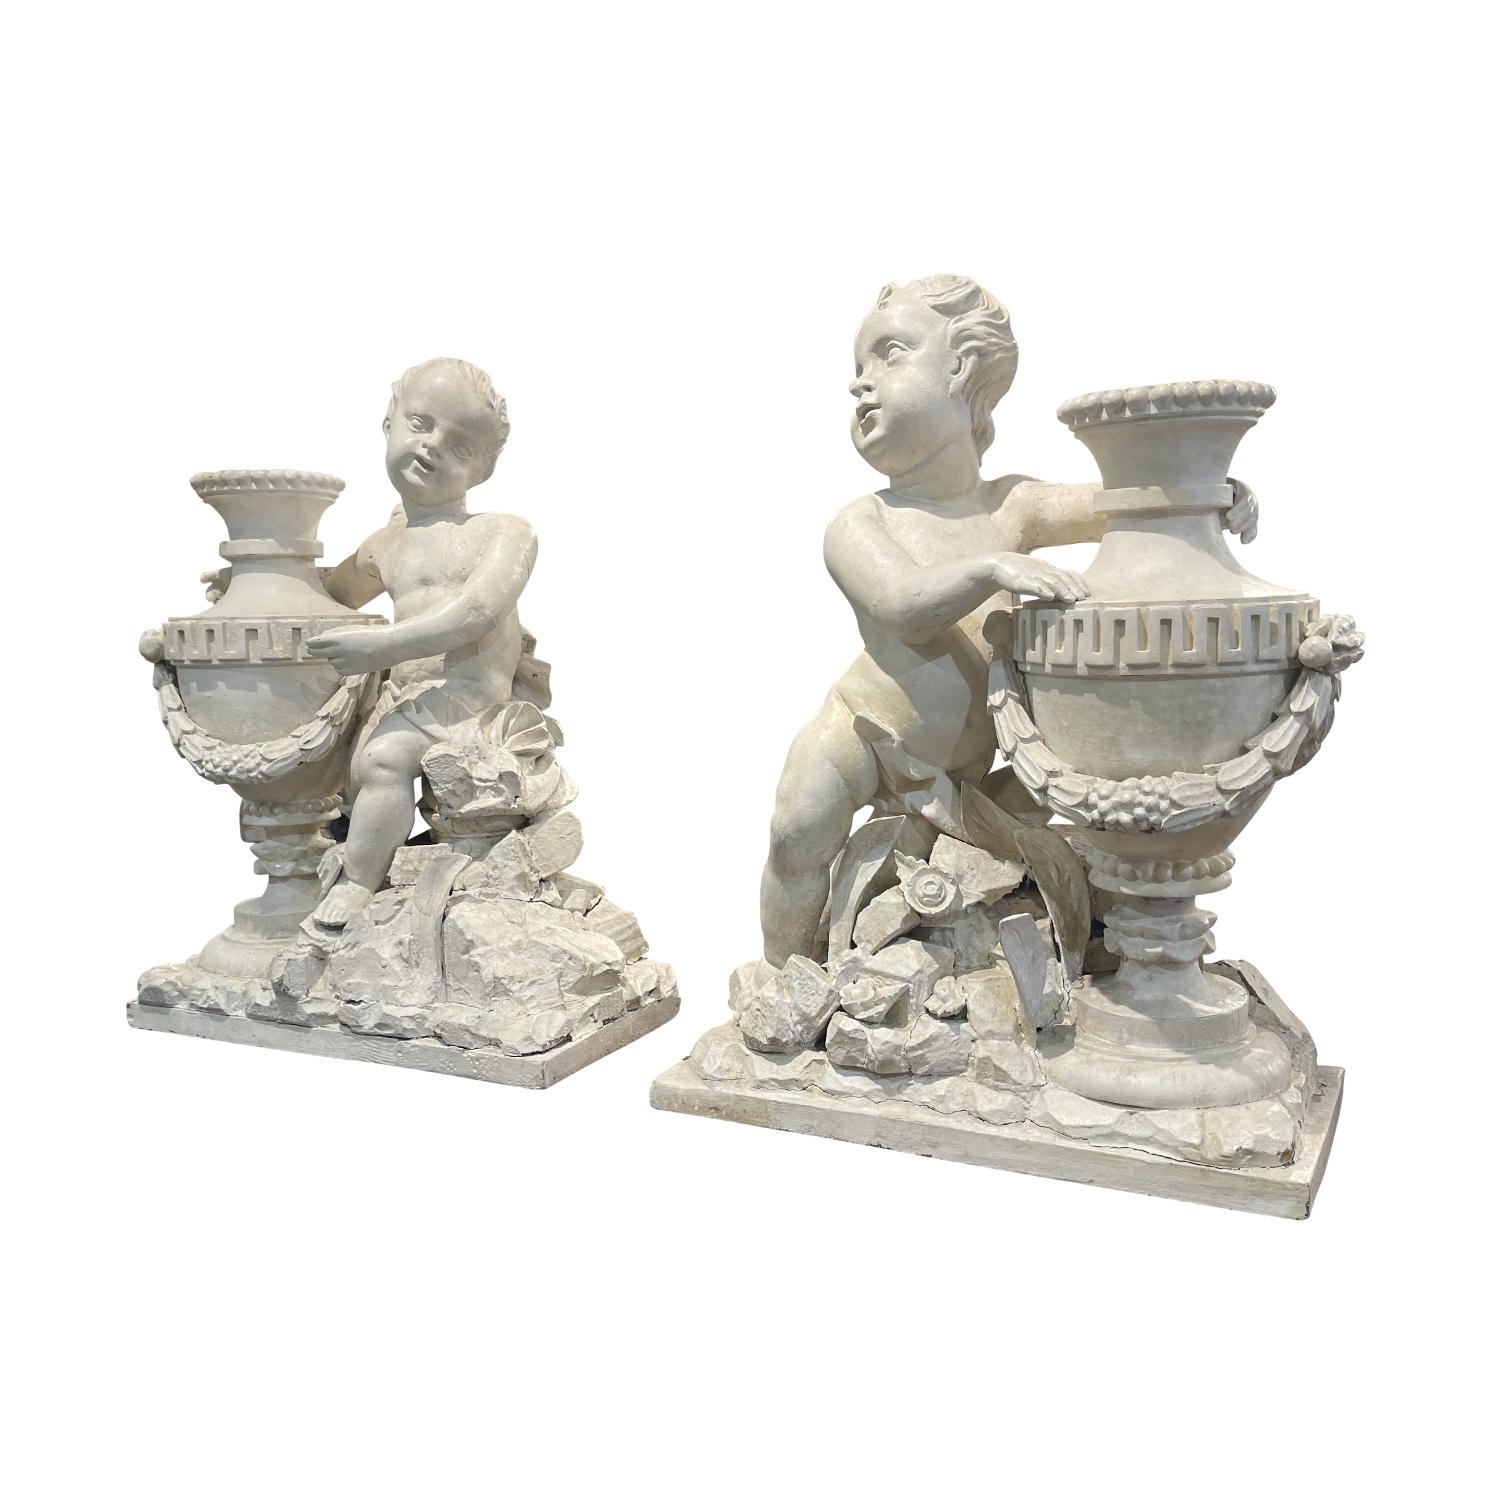 A white-grey pair of Louis XVI Epoque Putti or Cherubs statuettes. Hand sculpted and patinated in Walnut in their original antique condition. This Parisian pair of putti are facing each other, and are elegantly draped around the hips. They are